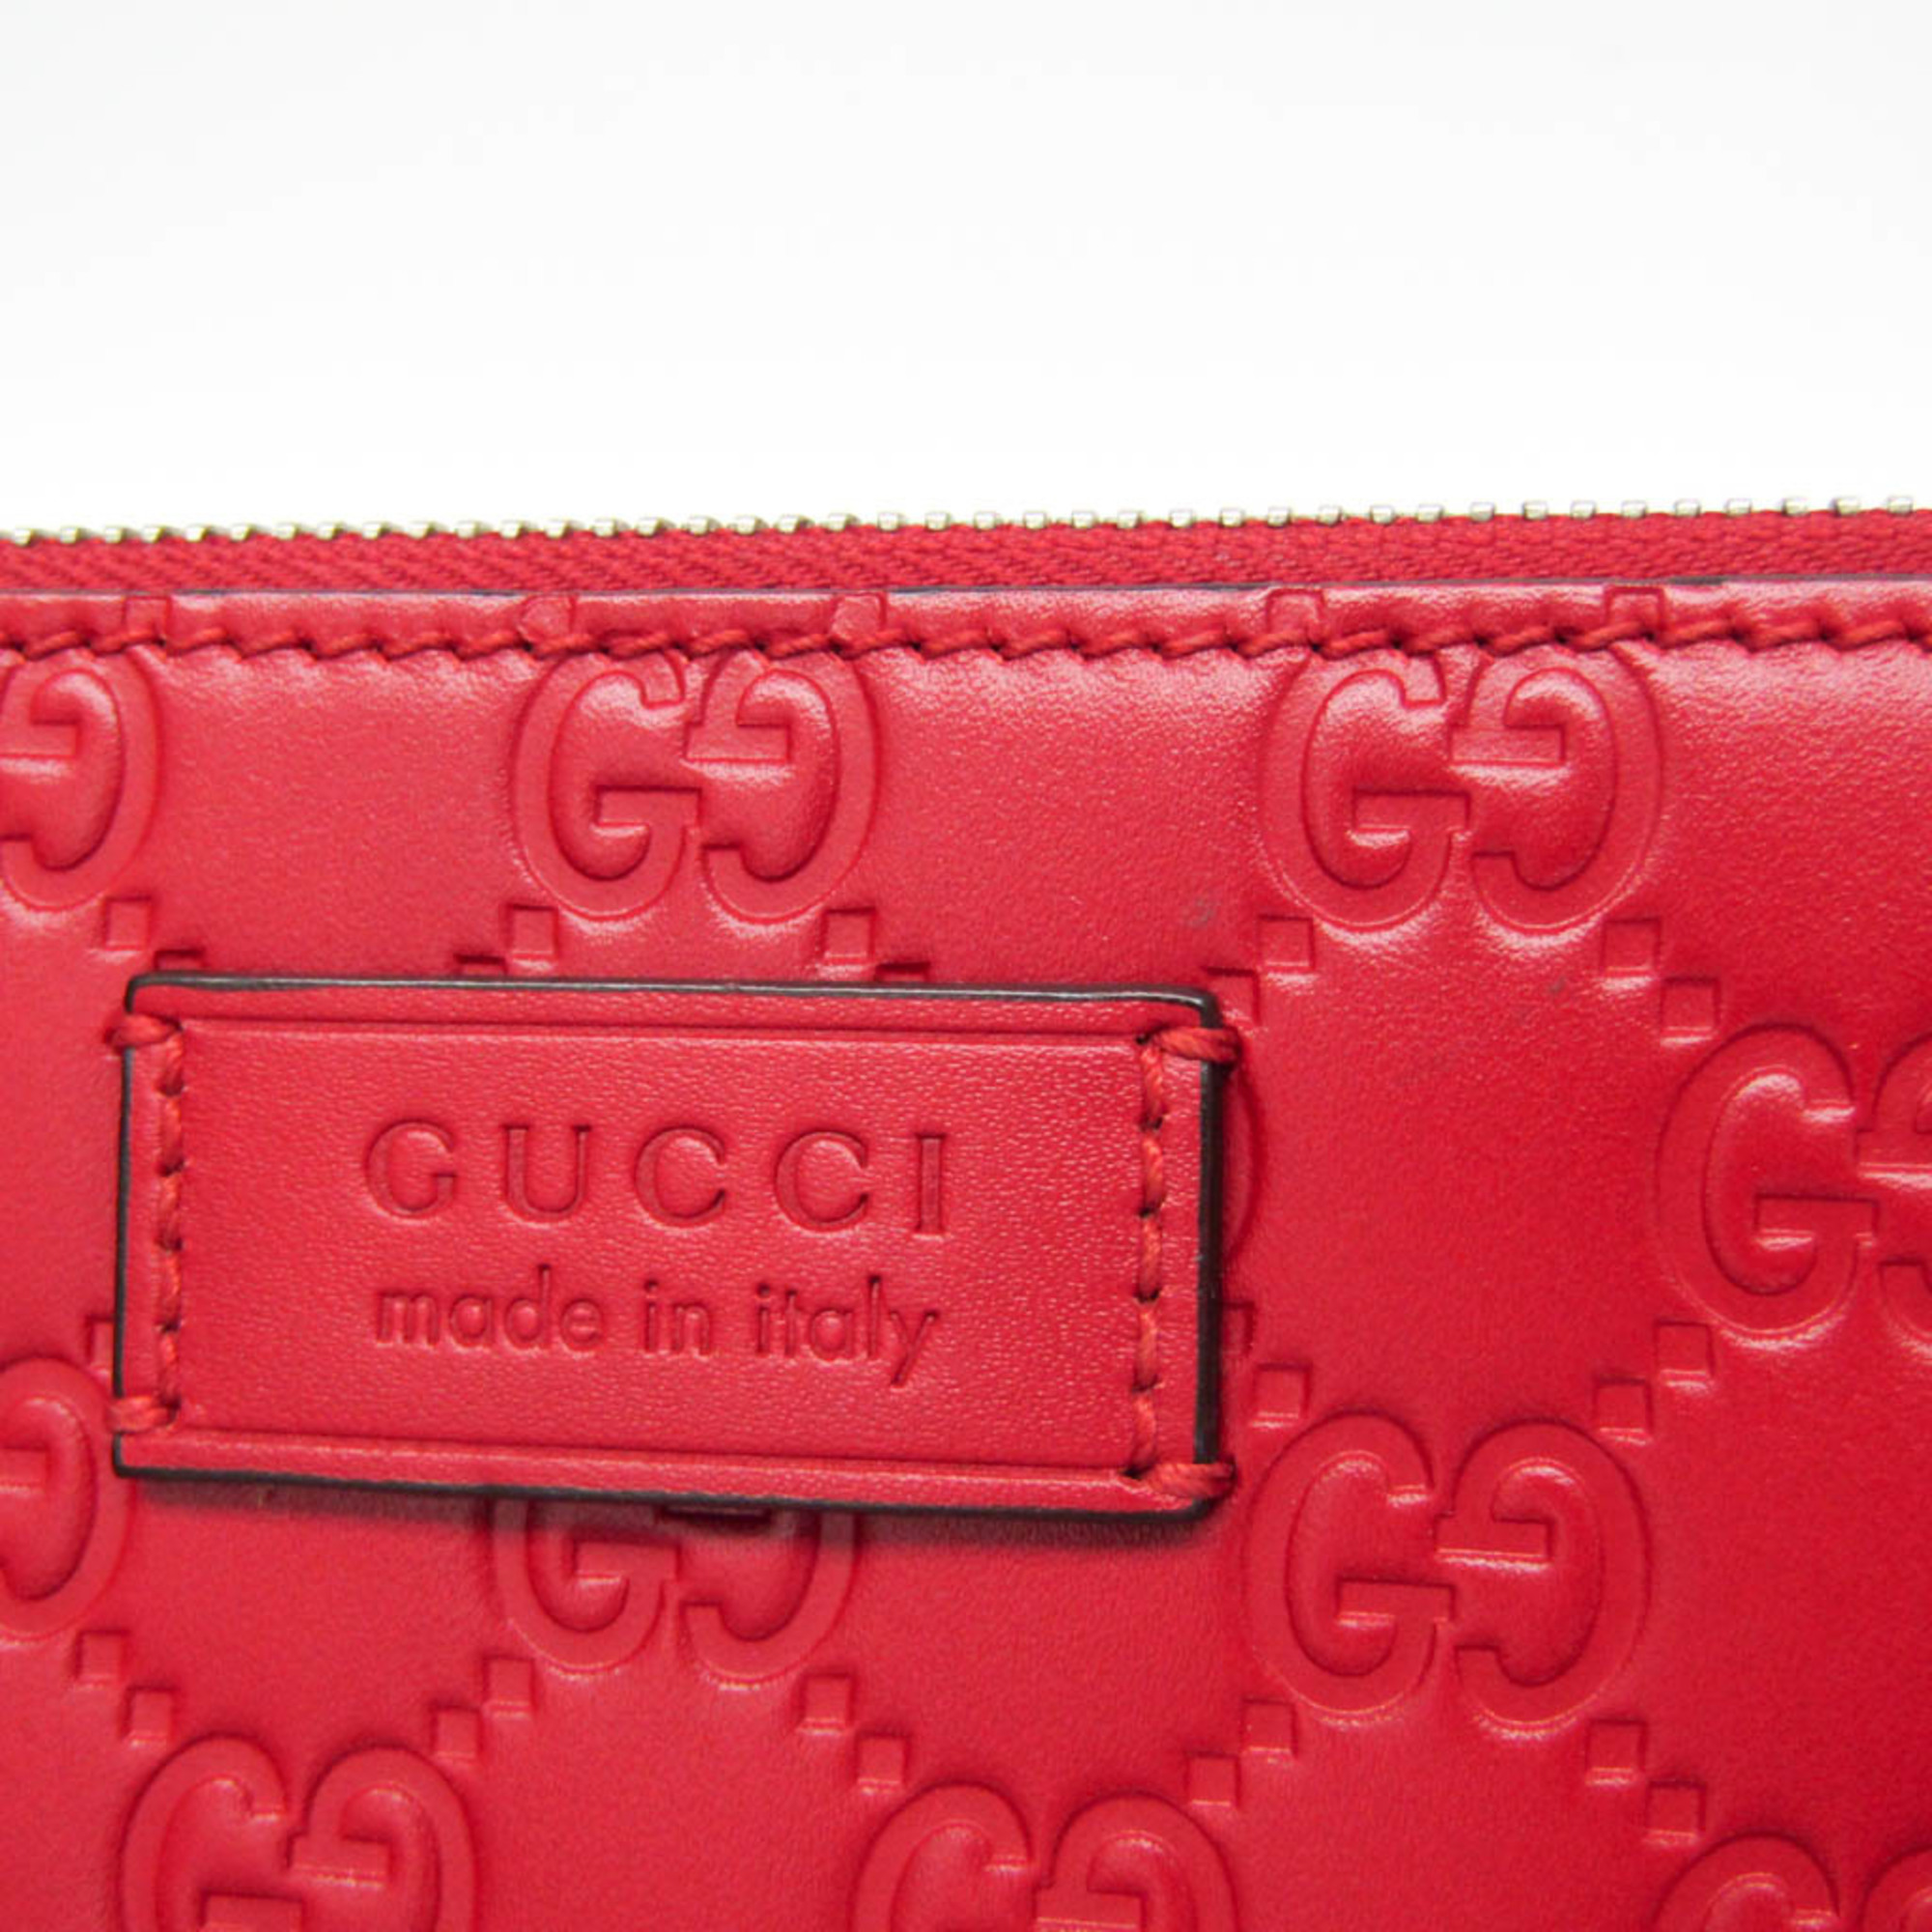 Gucci Guccissima 429004 Women's Leather Shoulder Bag Red Color